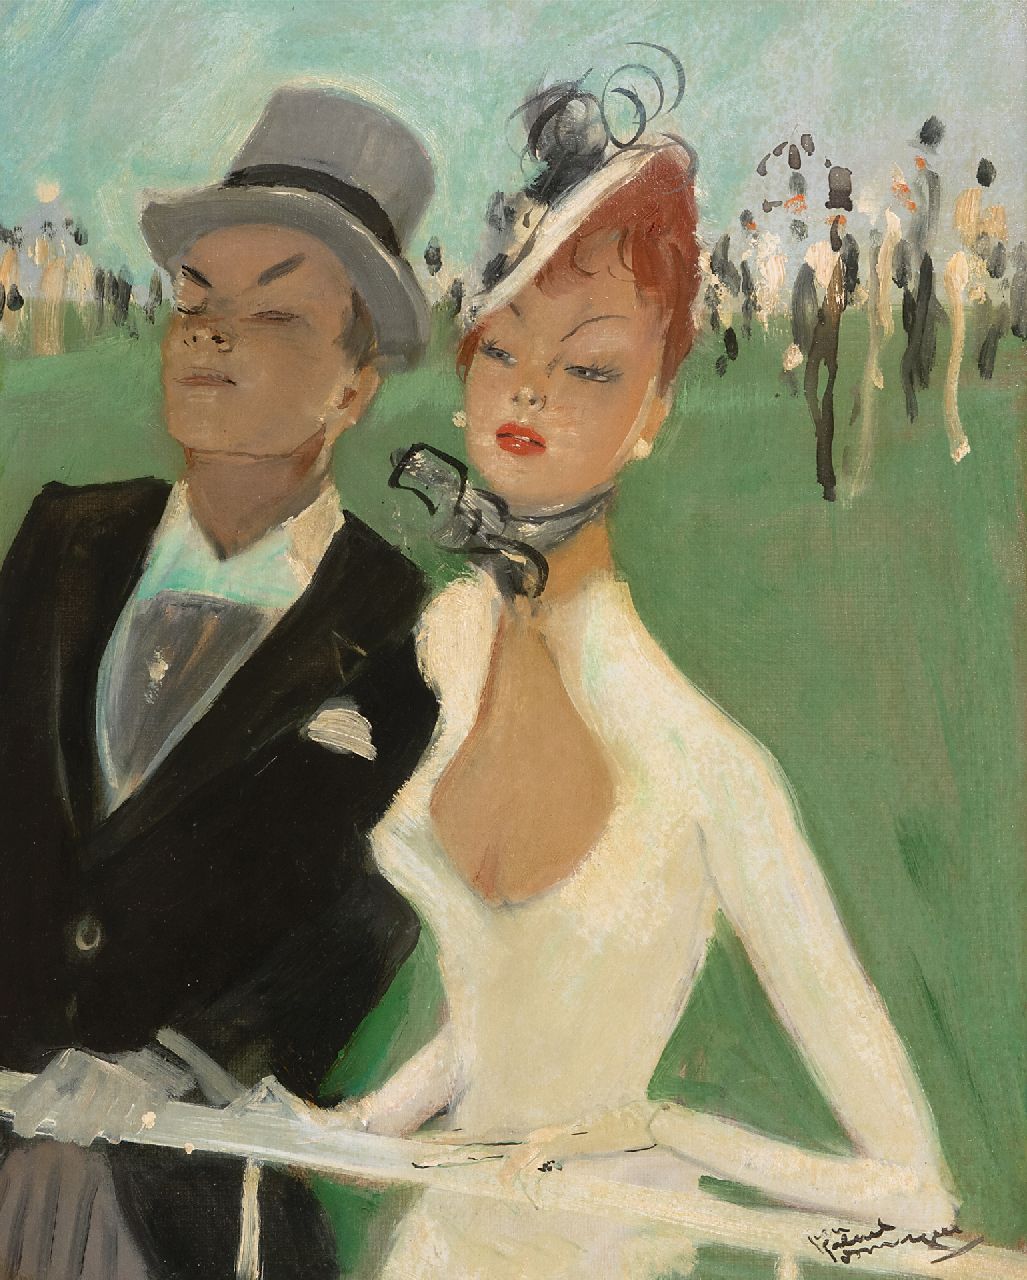 Domergue J.G.  | Jean-Gabriel Domergue | Paintings offered for sale | Au grand steeple, oil on board 40.9 x 32.8 cm, signed l.r. and dated '29 on the reverse